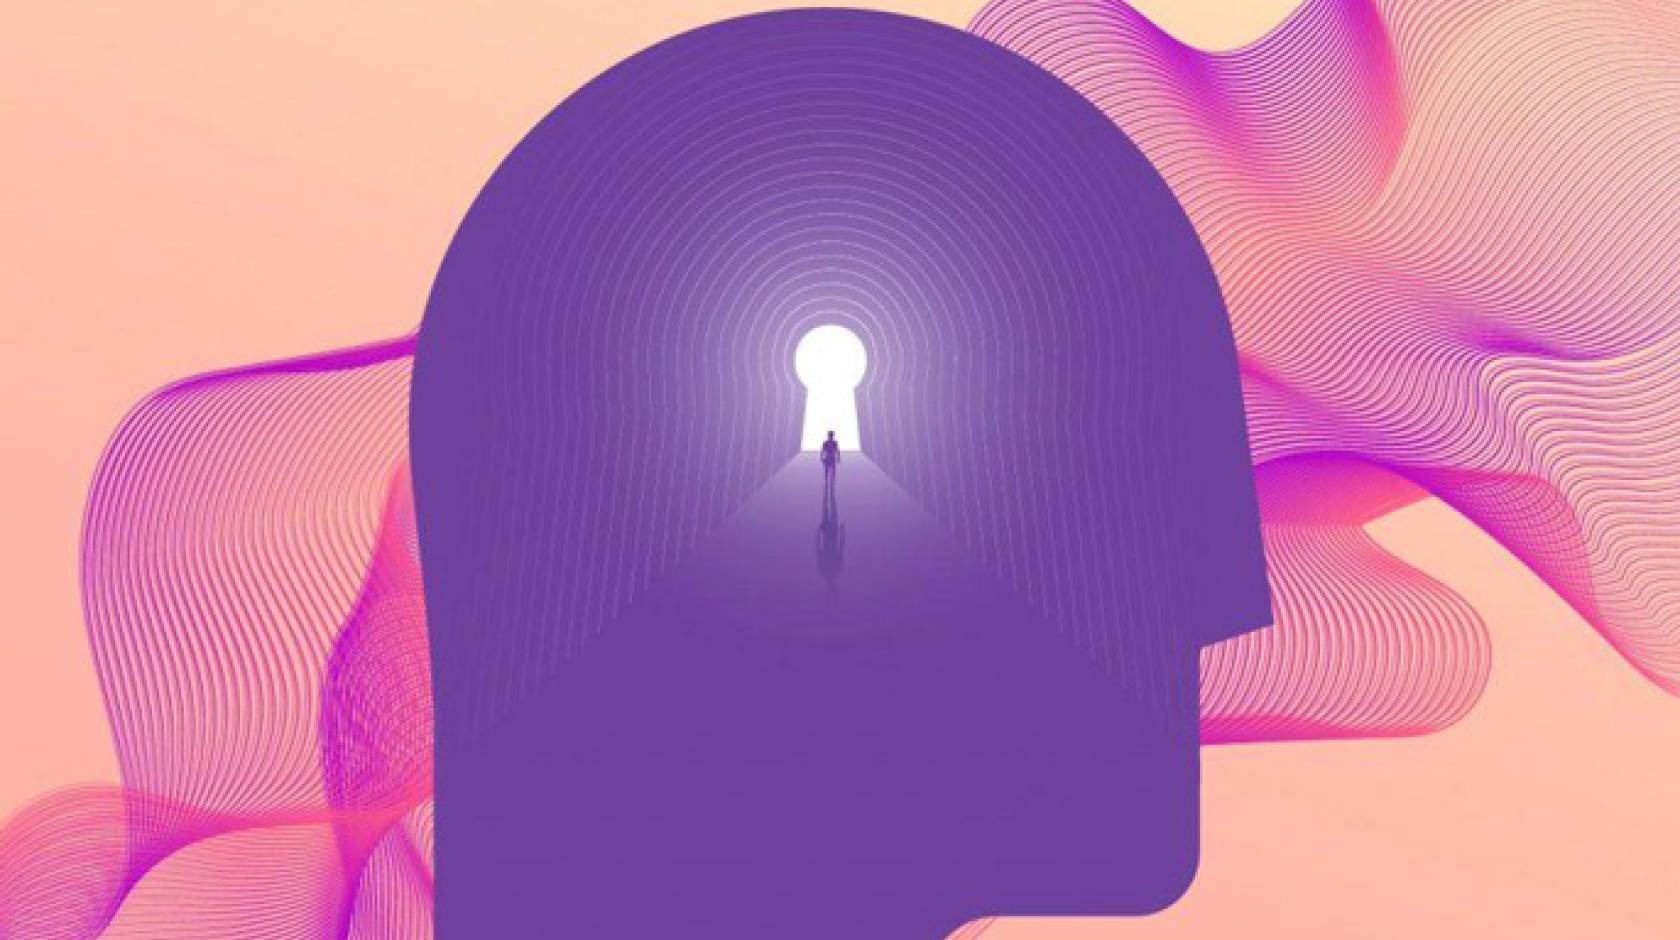 A person inside a purple silhouette of a head with a design in the background